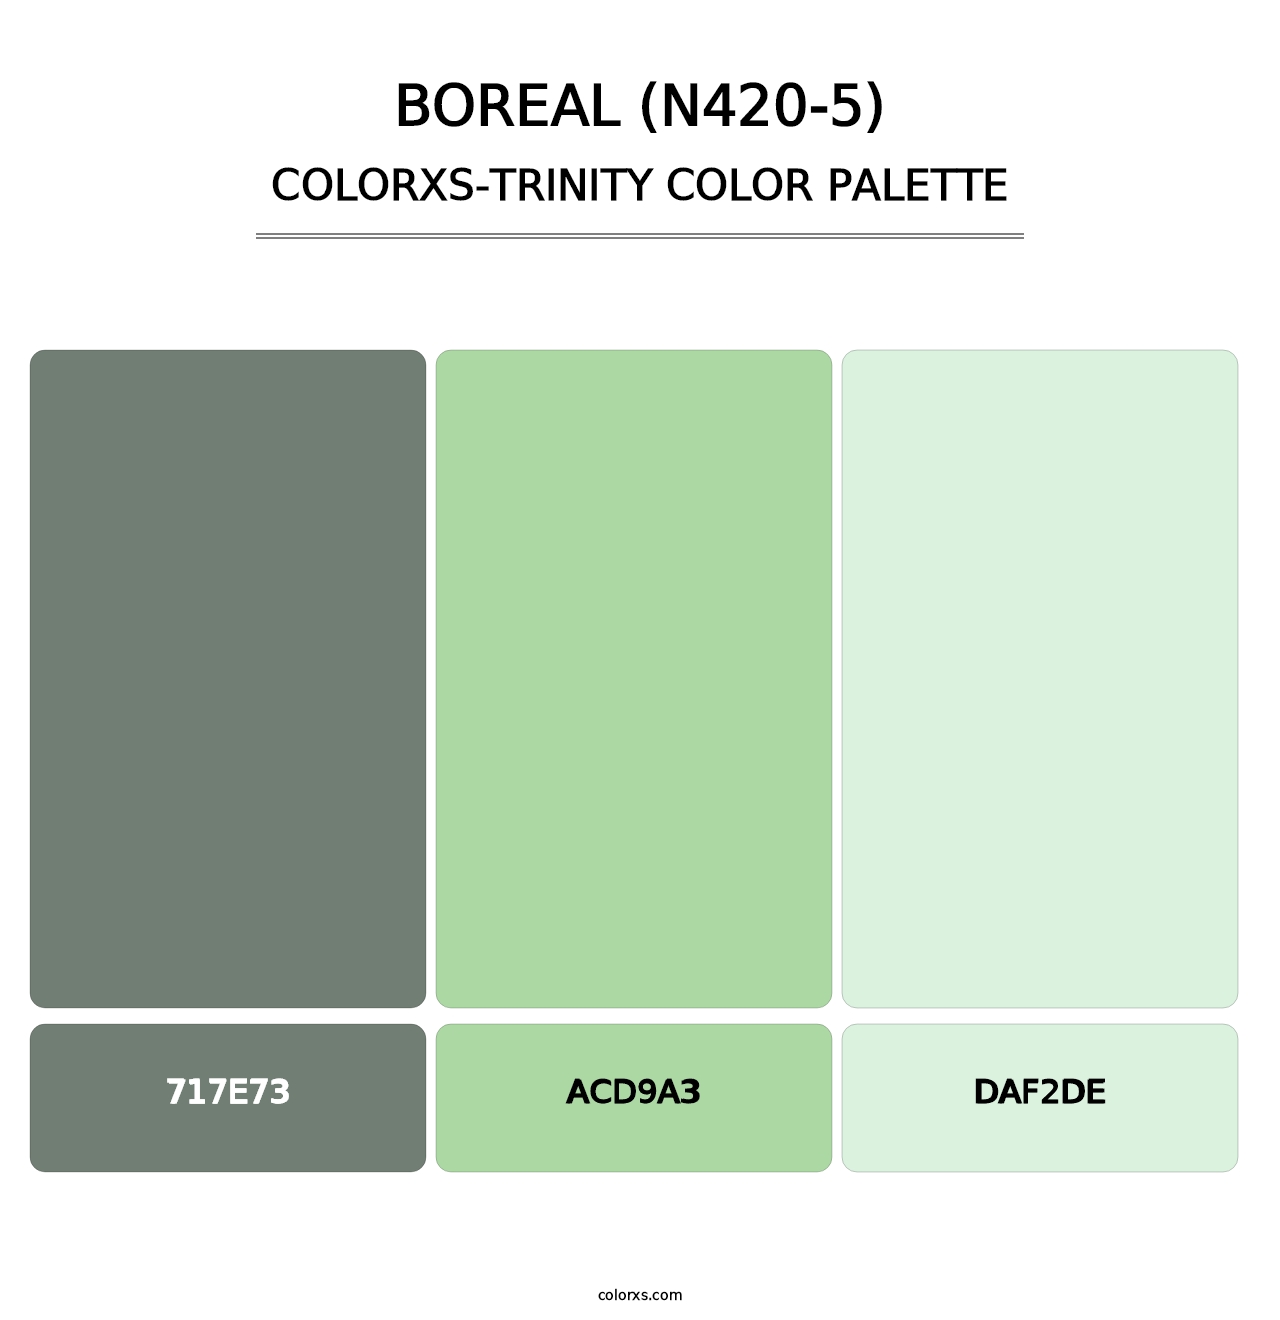 Boreal (N420-5) - Colorxs Trinity Palette